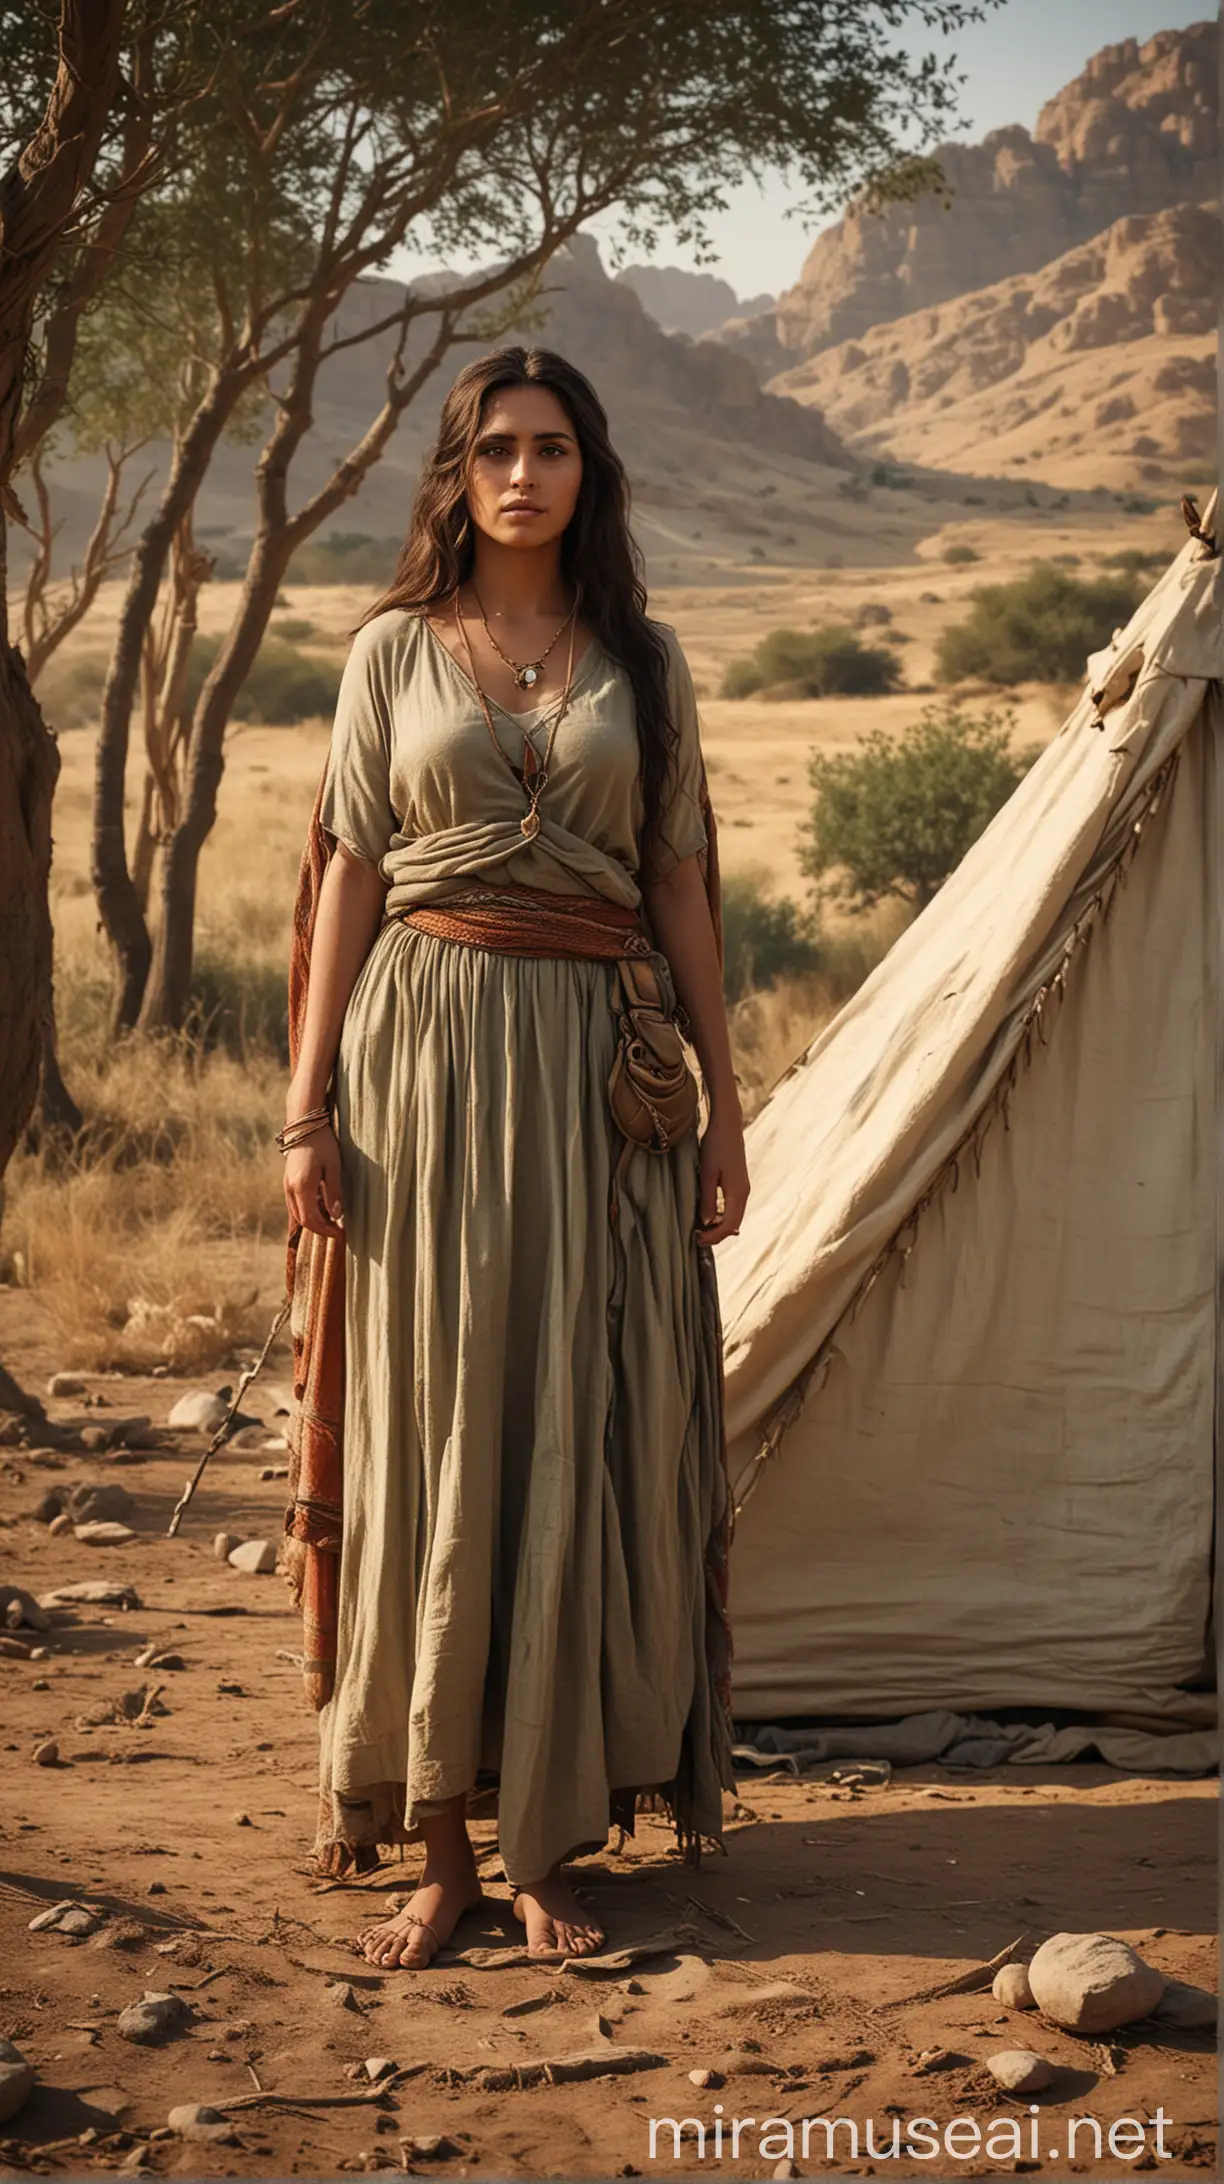 Create an image of Jael, a woman with a strong and calm demeanor, living in the 12th century BC. She is depicted with her husband, Heber, near their tent in a peaceful landscape close to Kedesh. The background should show a serene environment with hints of the surrounding ancient wilderness."In ancient world 